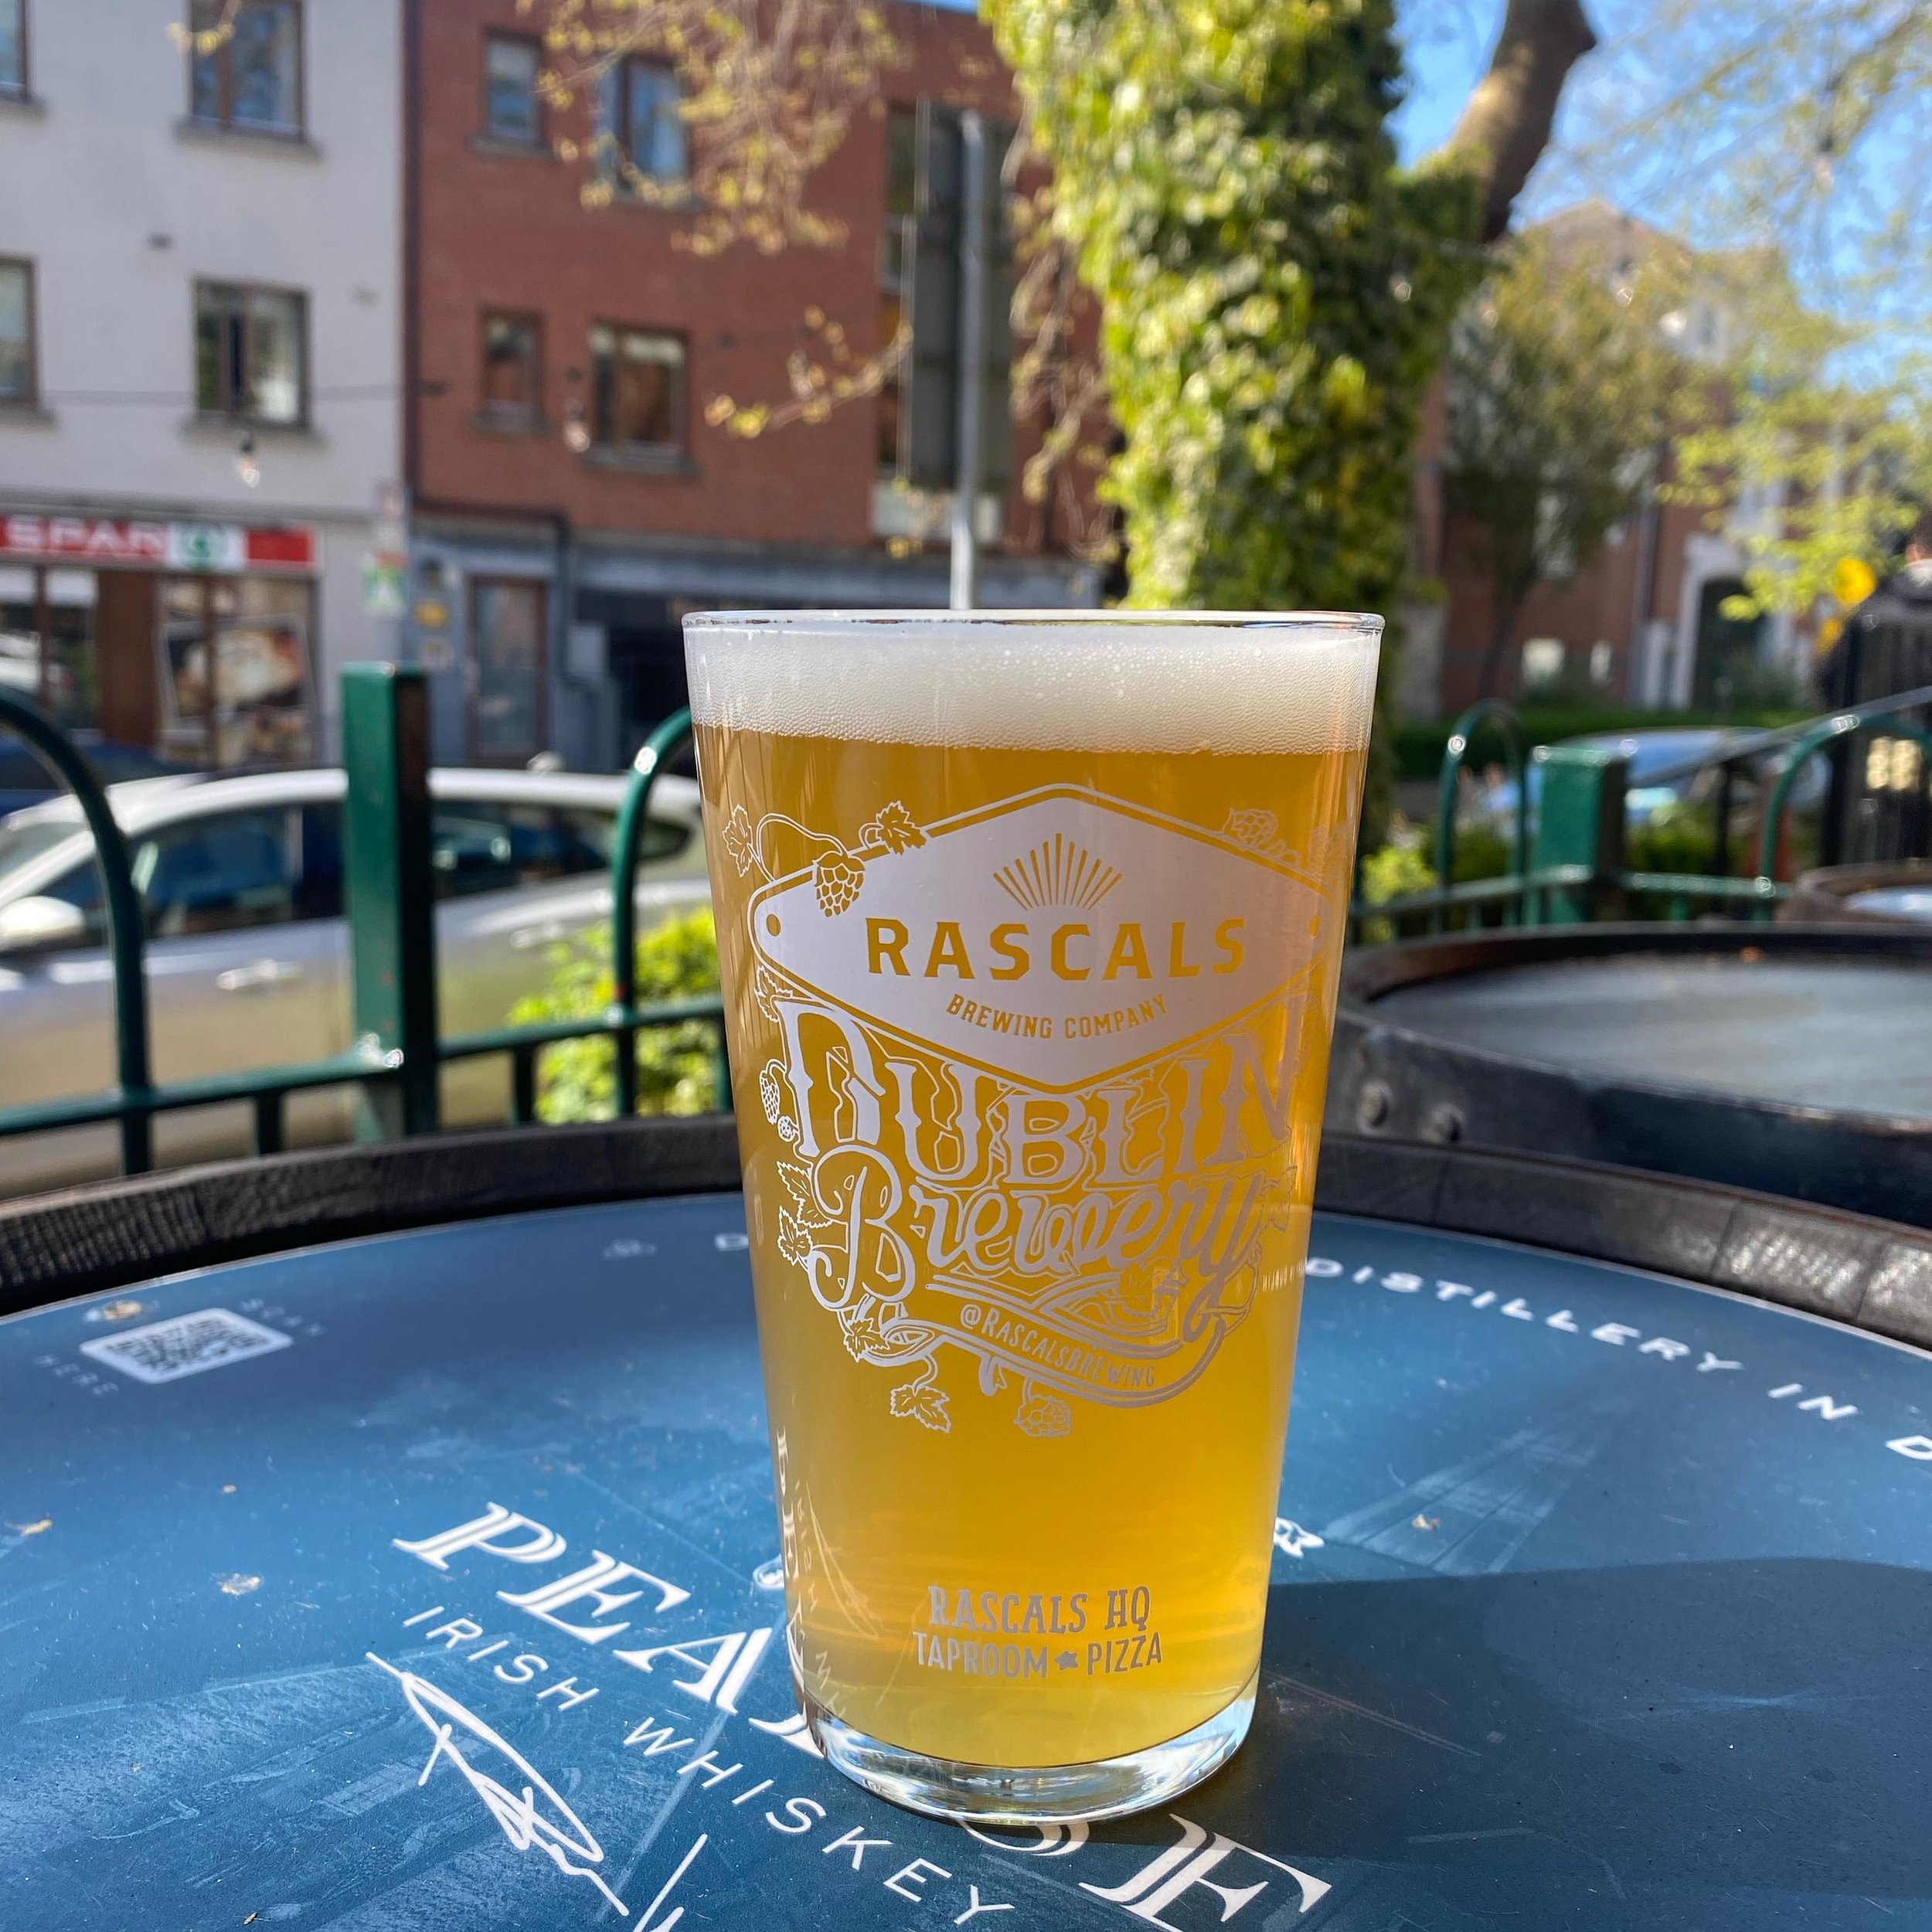 This is looking very promising for some curb side pints this evening 🌞🌞🌅🌅🕶️🕶️